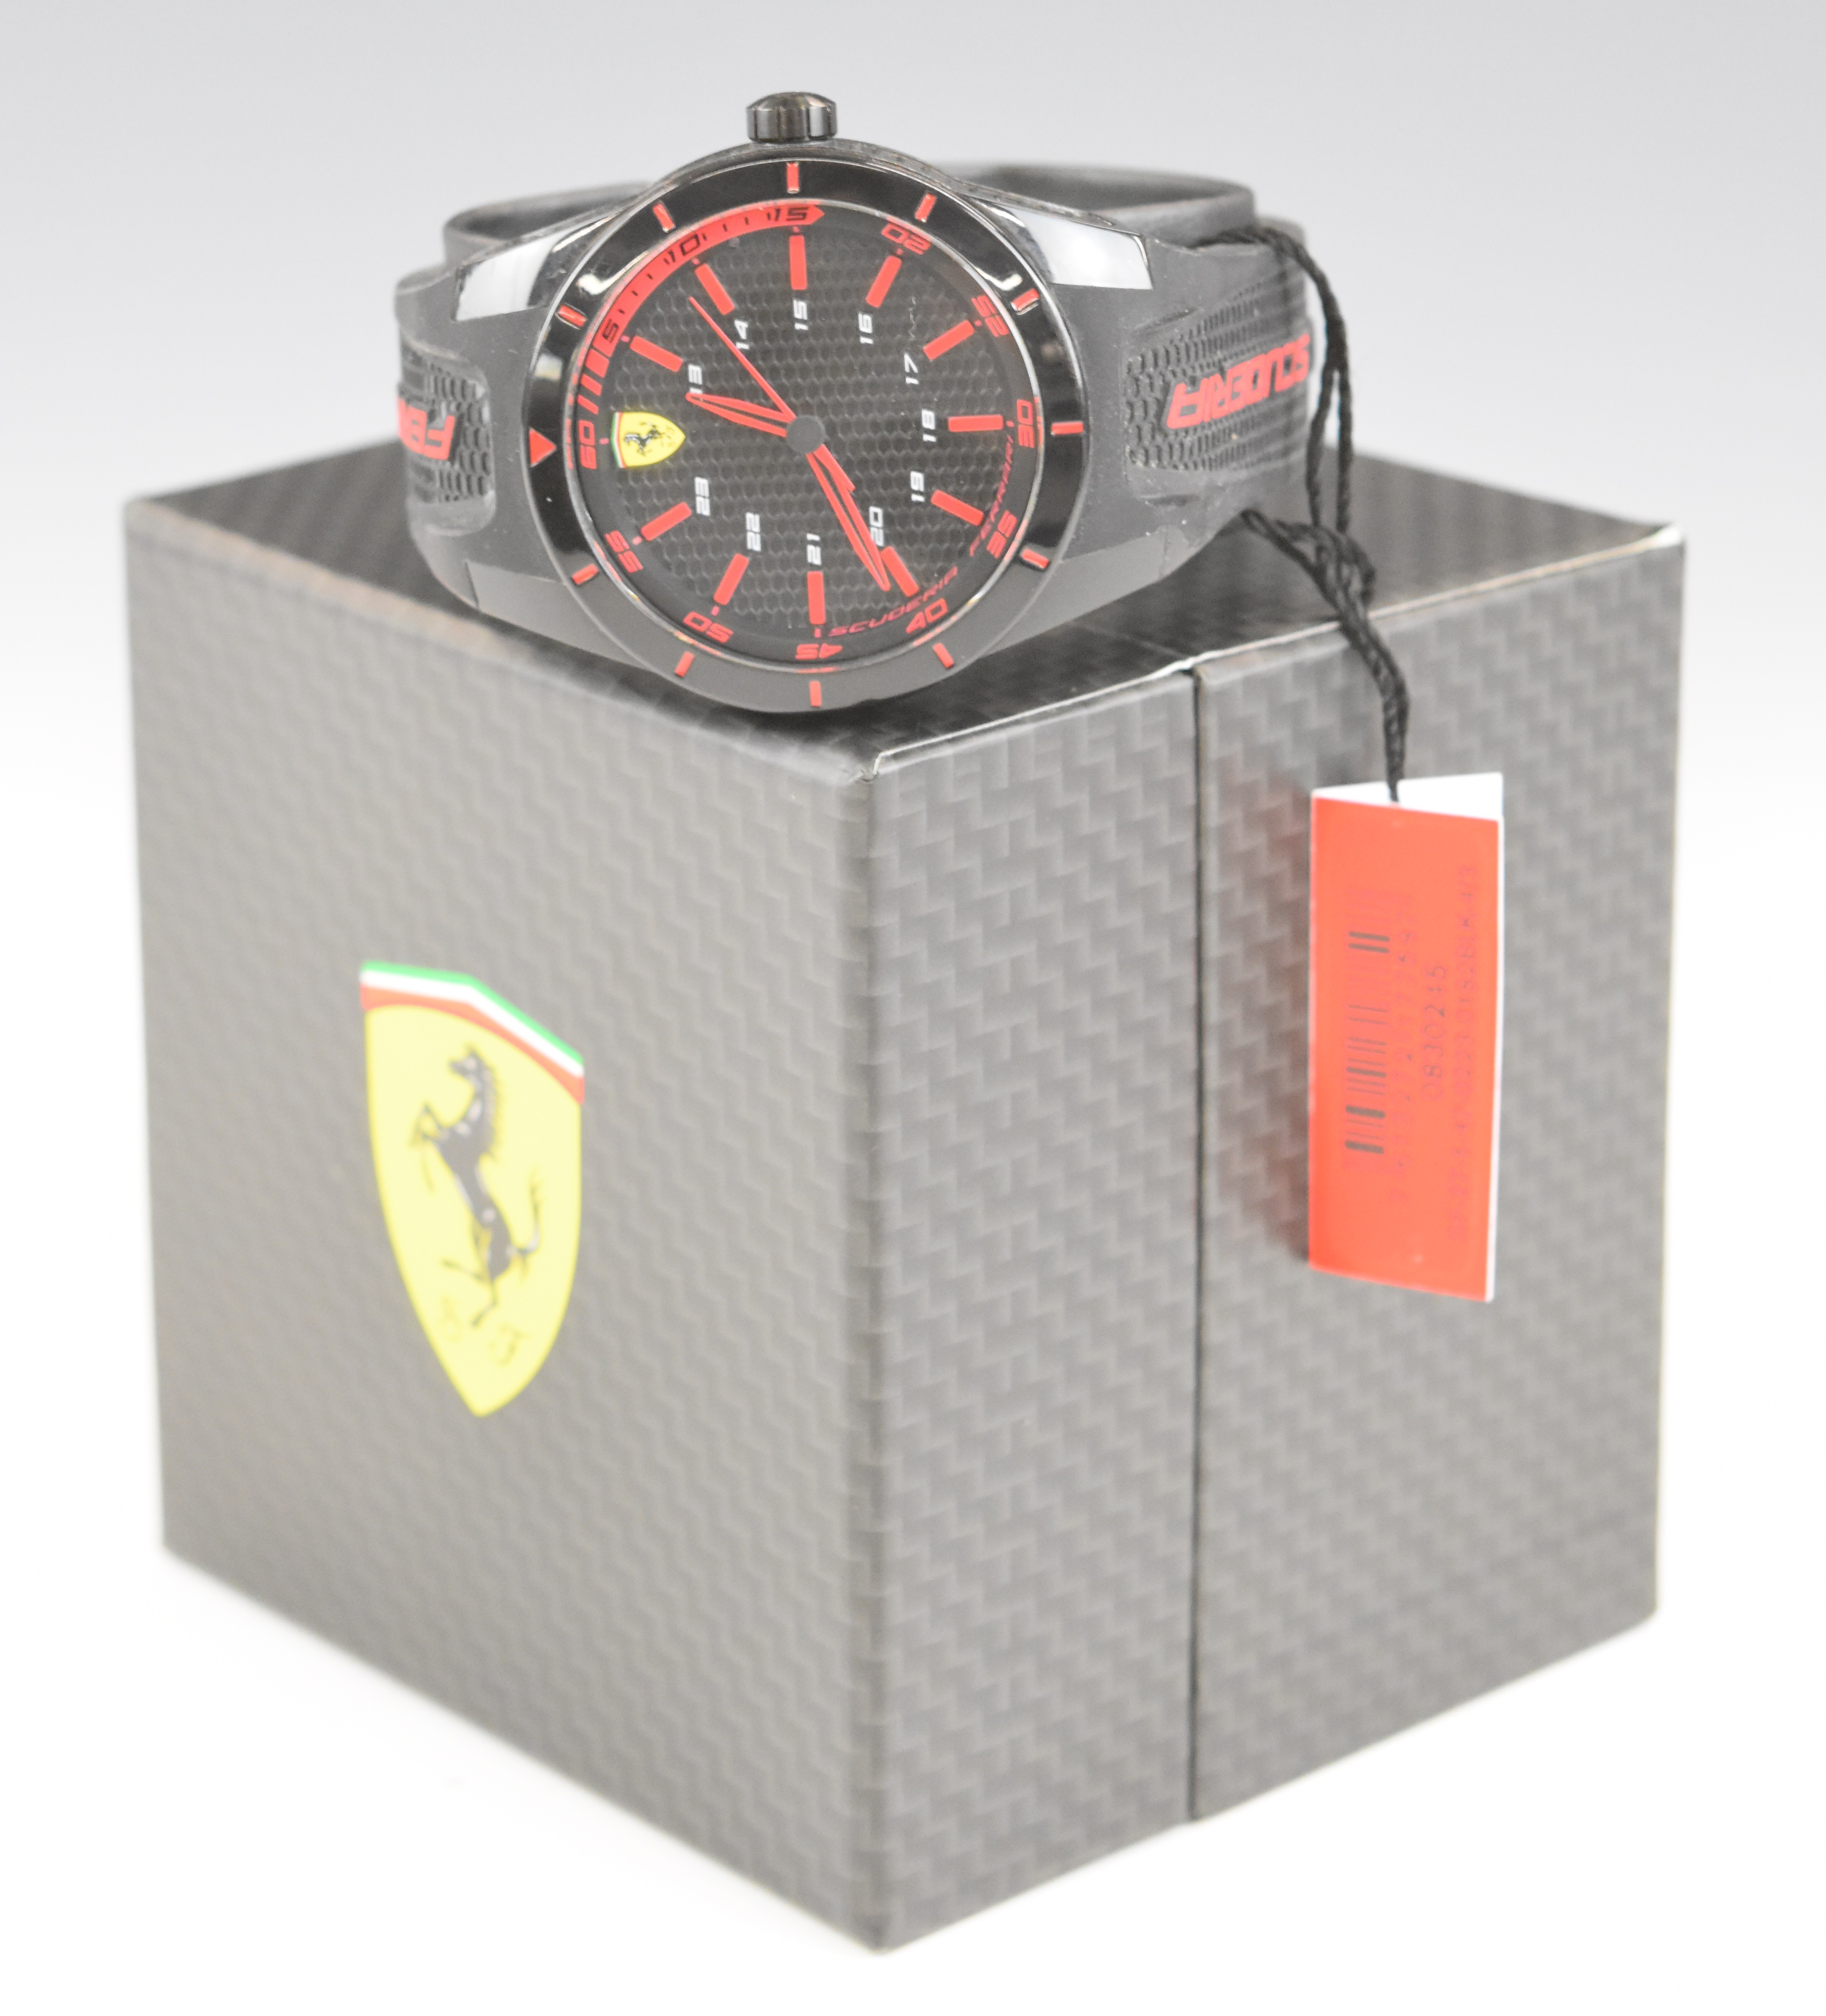 Scuderia Ferrari gentleman's wristwatch with red hands and hour markers, black dial, bezel and